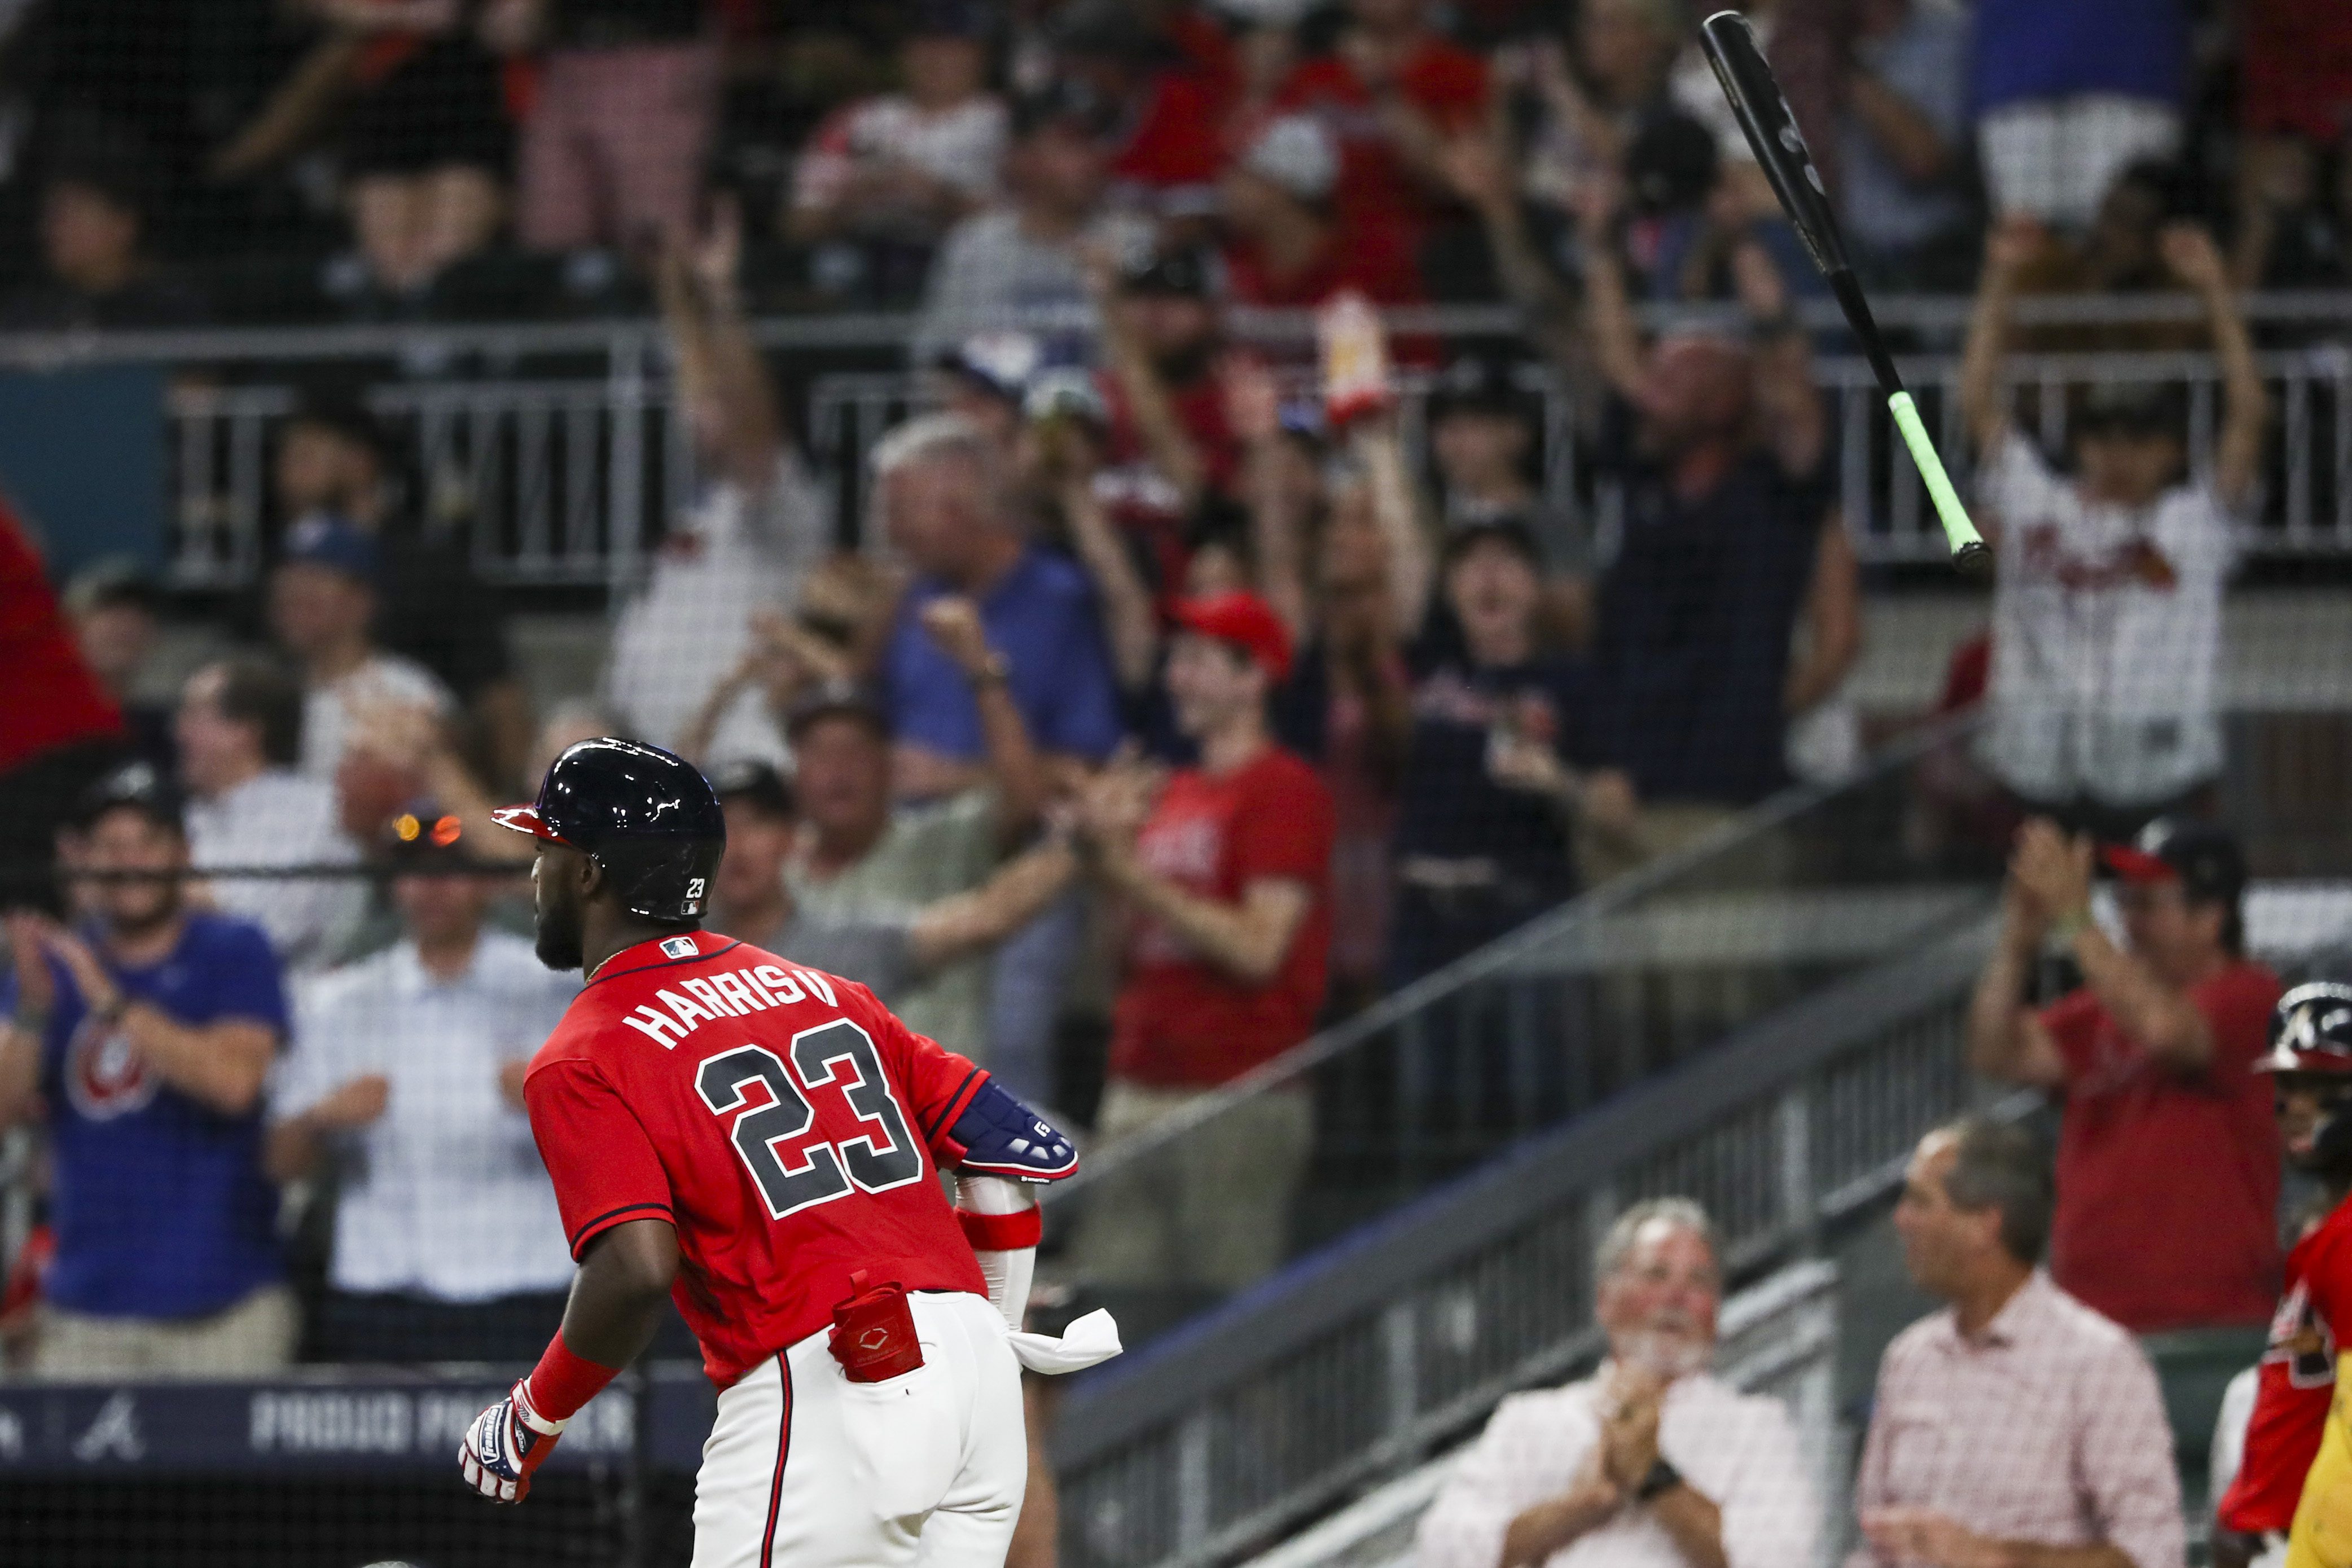 Michael Harris, Charlie Morton star in Braves' win over Nationals